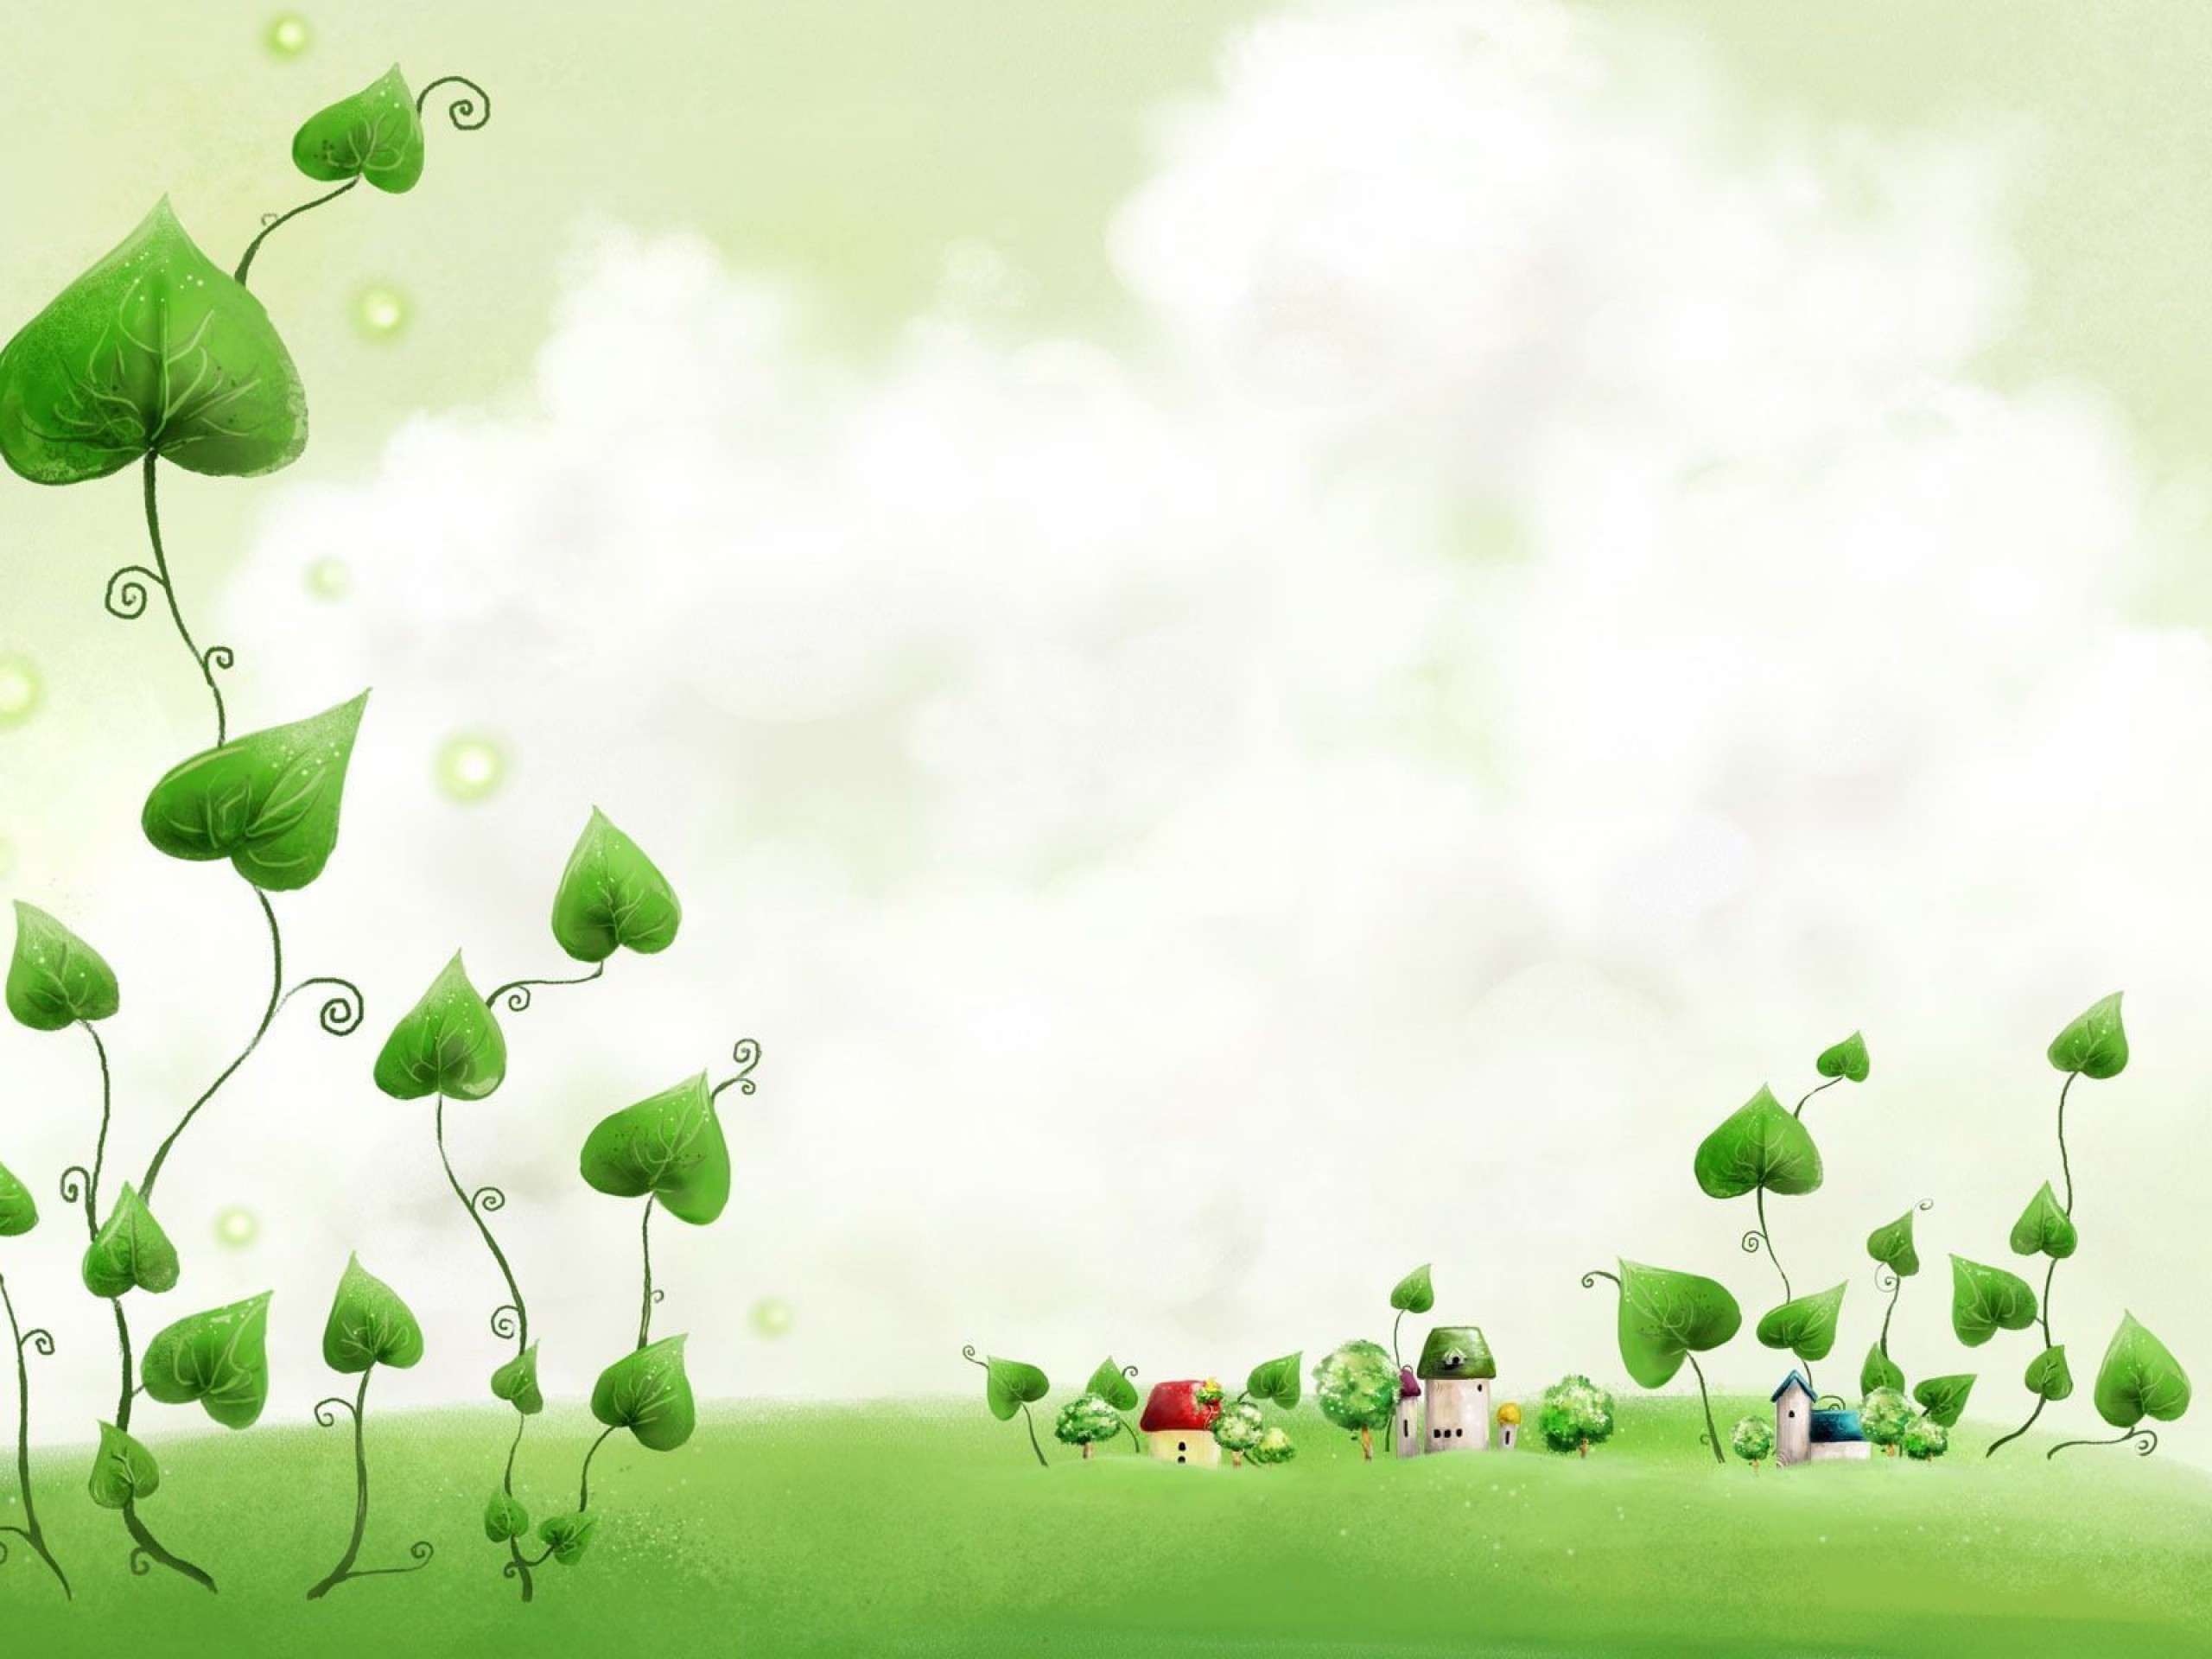 Green Plant Cartoon Wallpaper Hd Images Free Download - Cartoon Background Wallpaper Hd , HD Wallpaper & Backgrounds